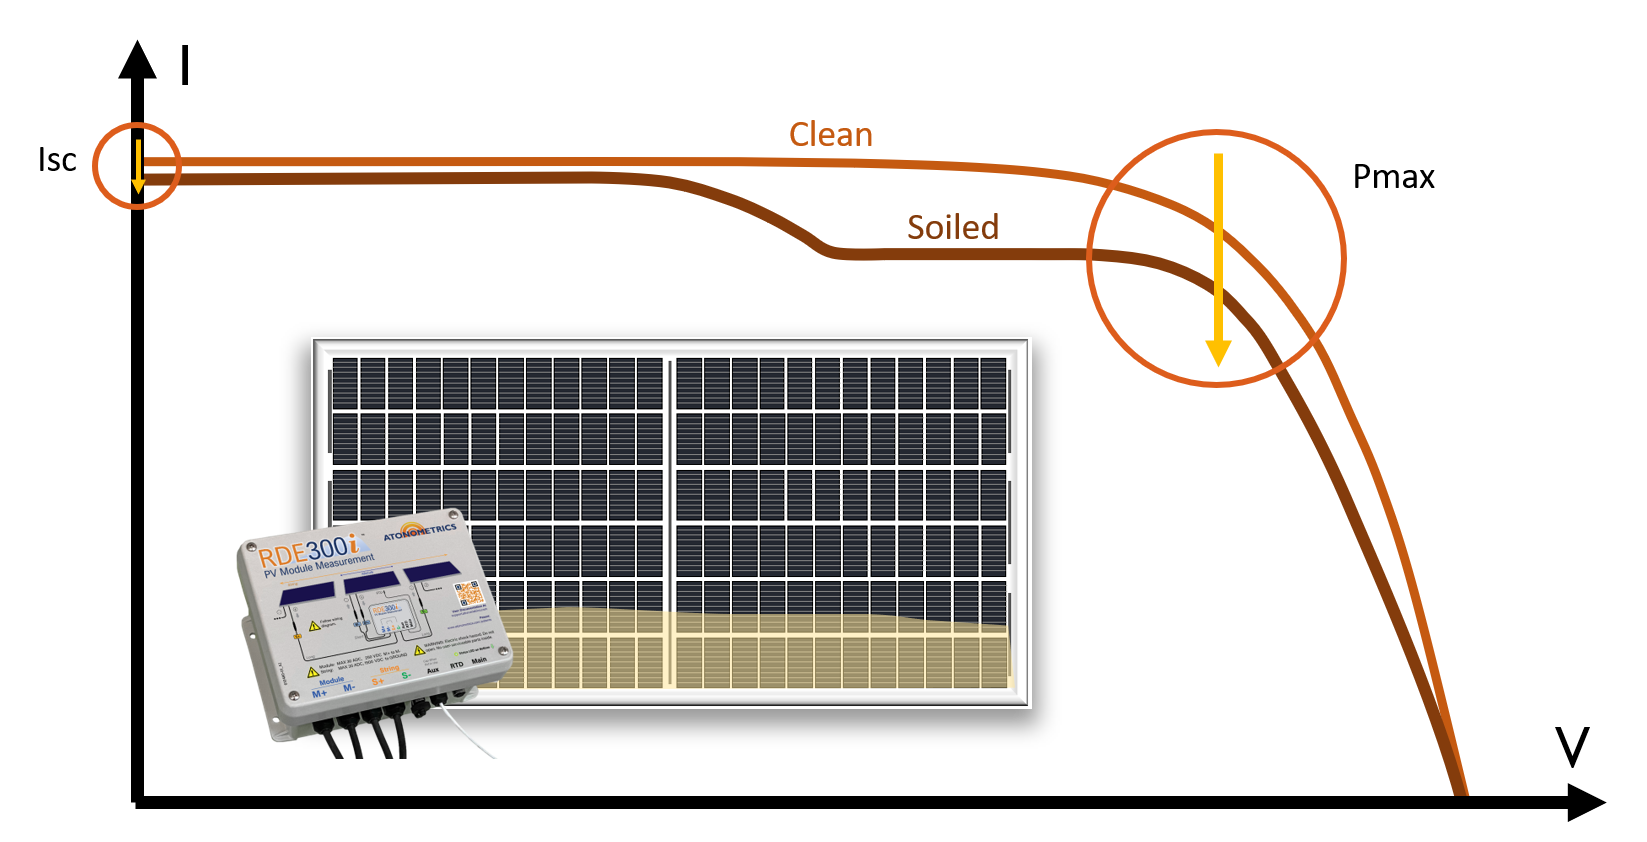 Solar IV Curve with Non-Uniform Soiled Panel and RDE300i